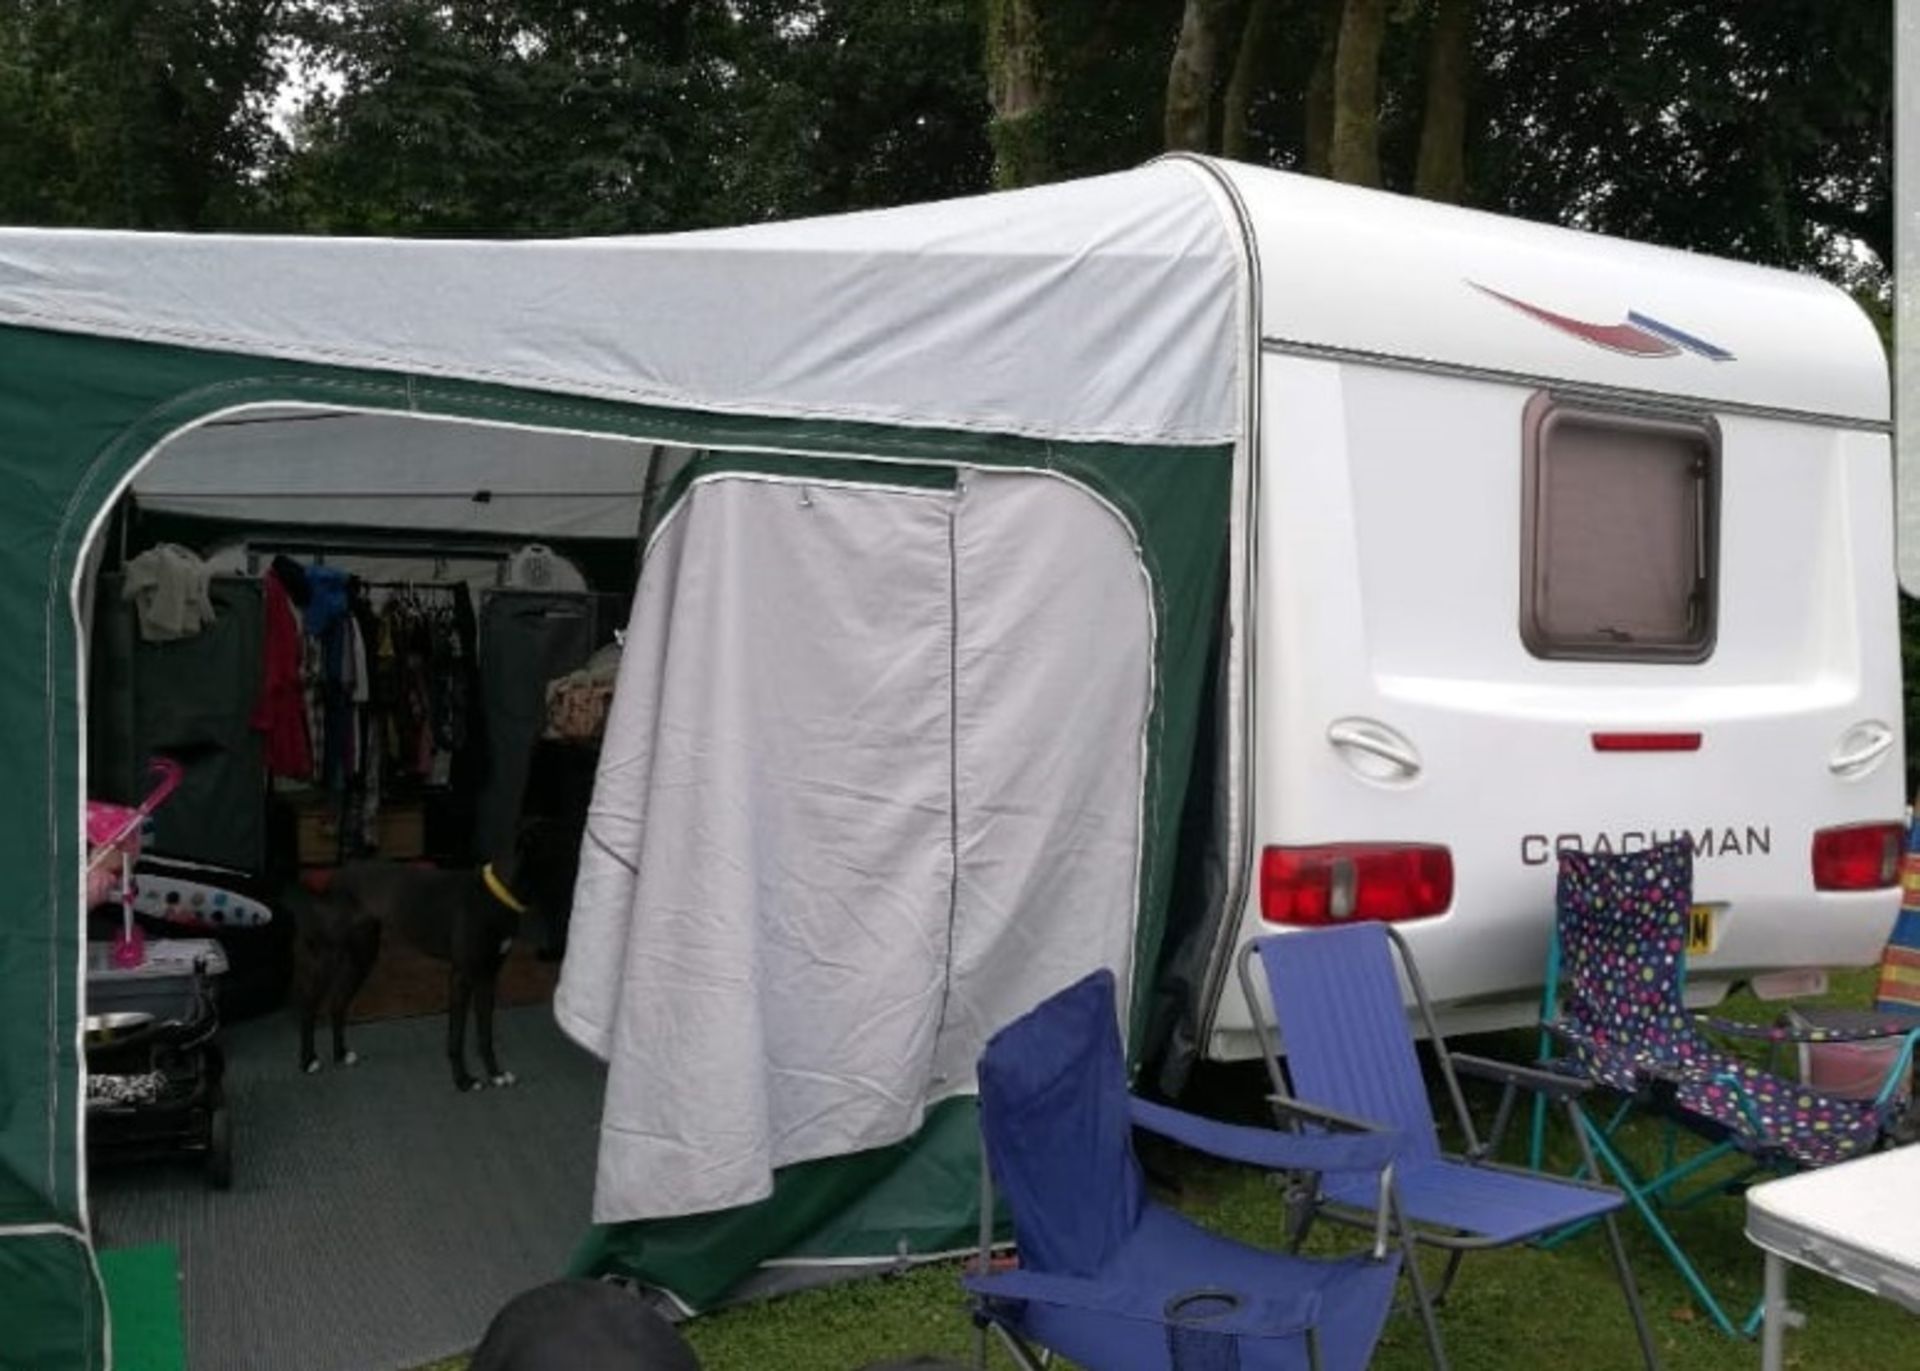 COACHMAN AMARA 4 BERTH CARAVAN COMES WITH AWNING, IN FULL WORKING ORDER, GOOD CONDITION *NO VAT* - Image 6 of 11